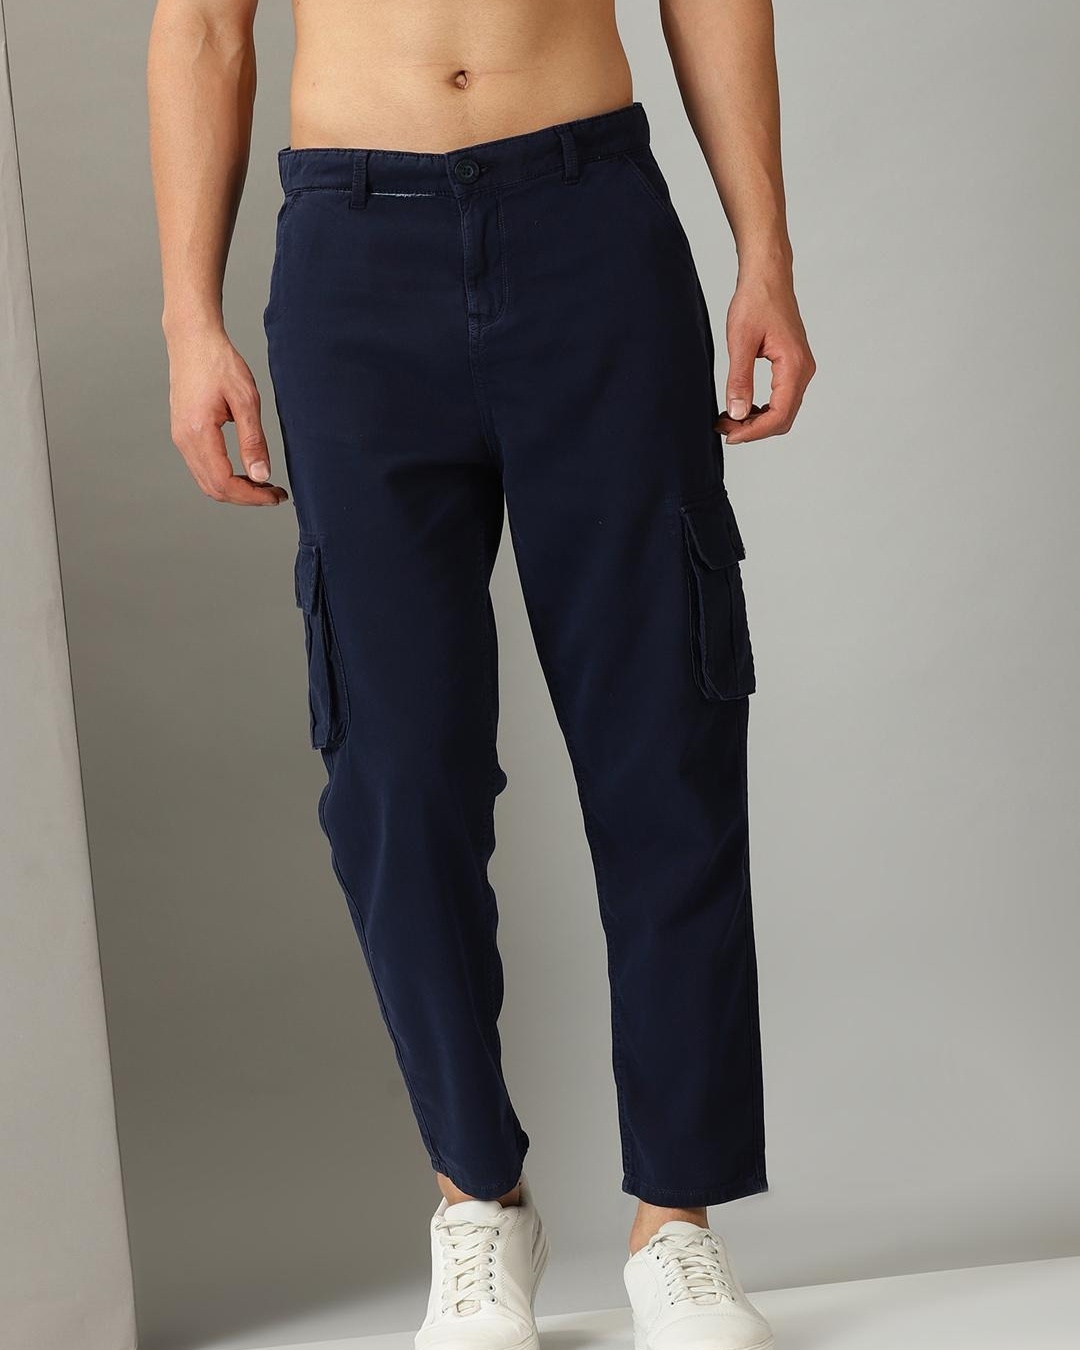 Relaxed Fit Cargo Pants - GANT